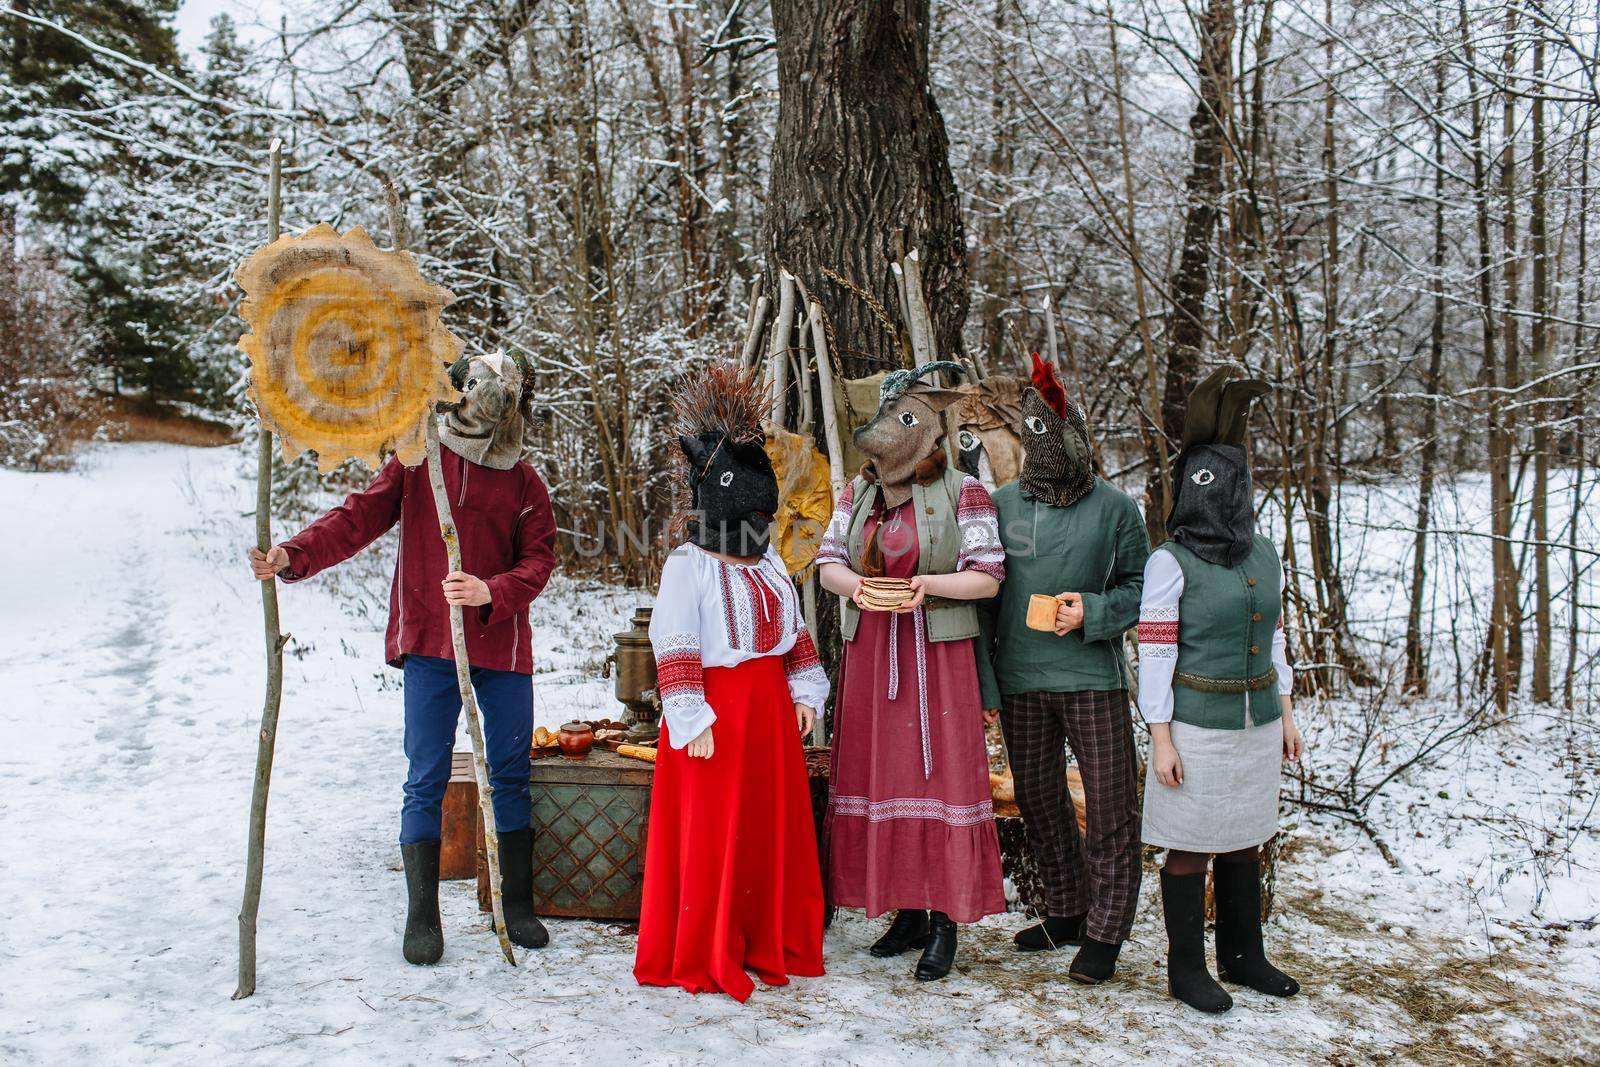 People in national costumes with animal heads celebrate the arrival of the pagan holiday Maslenitsa. An ancient pag by deandy